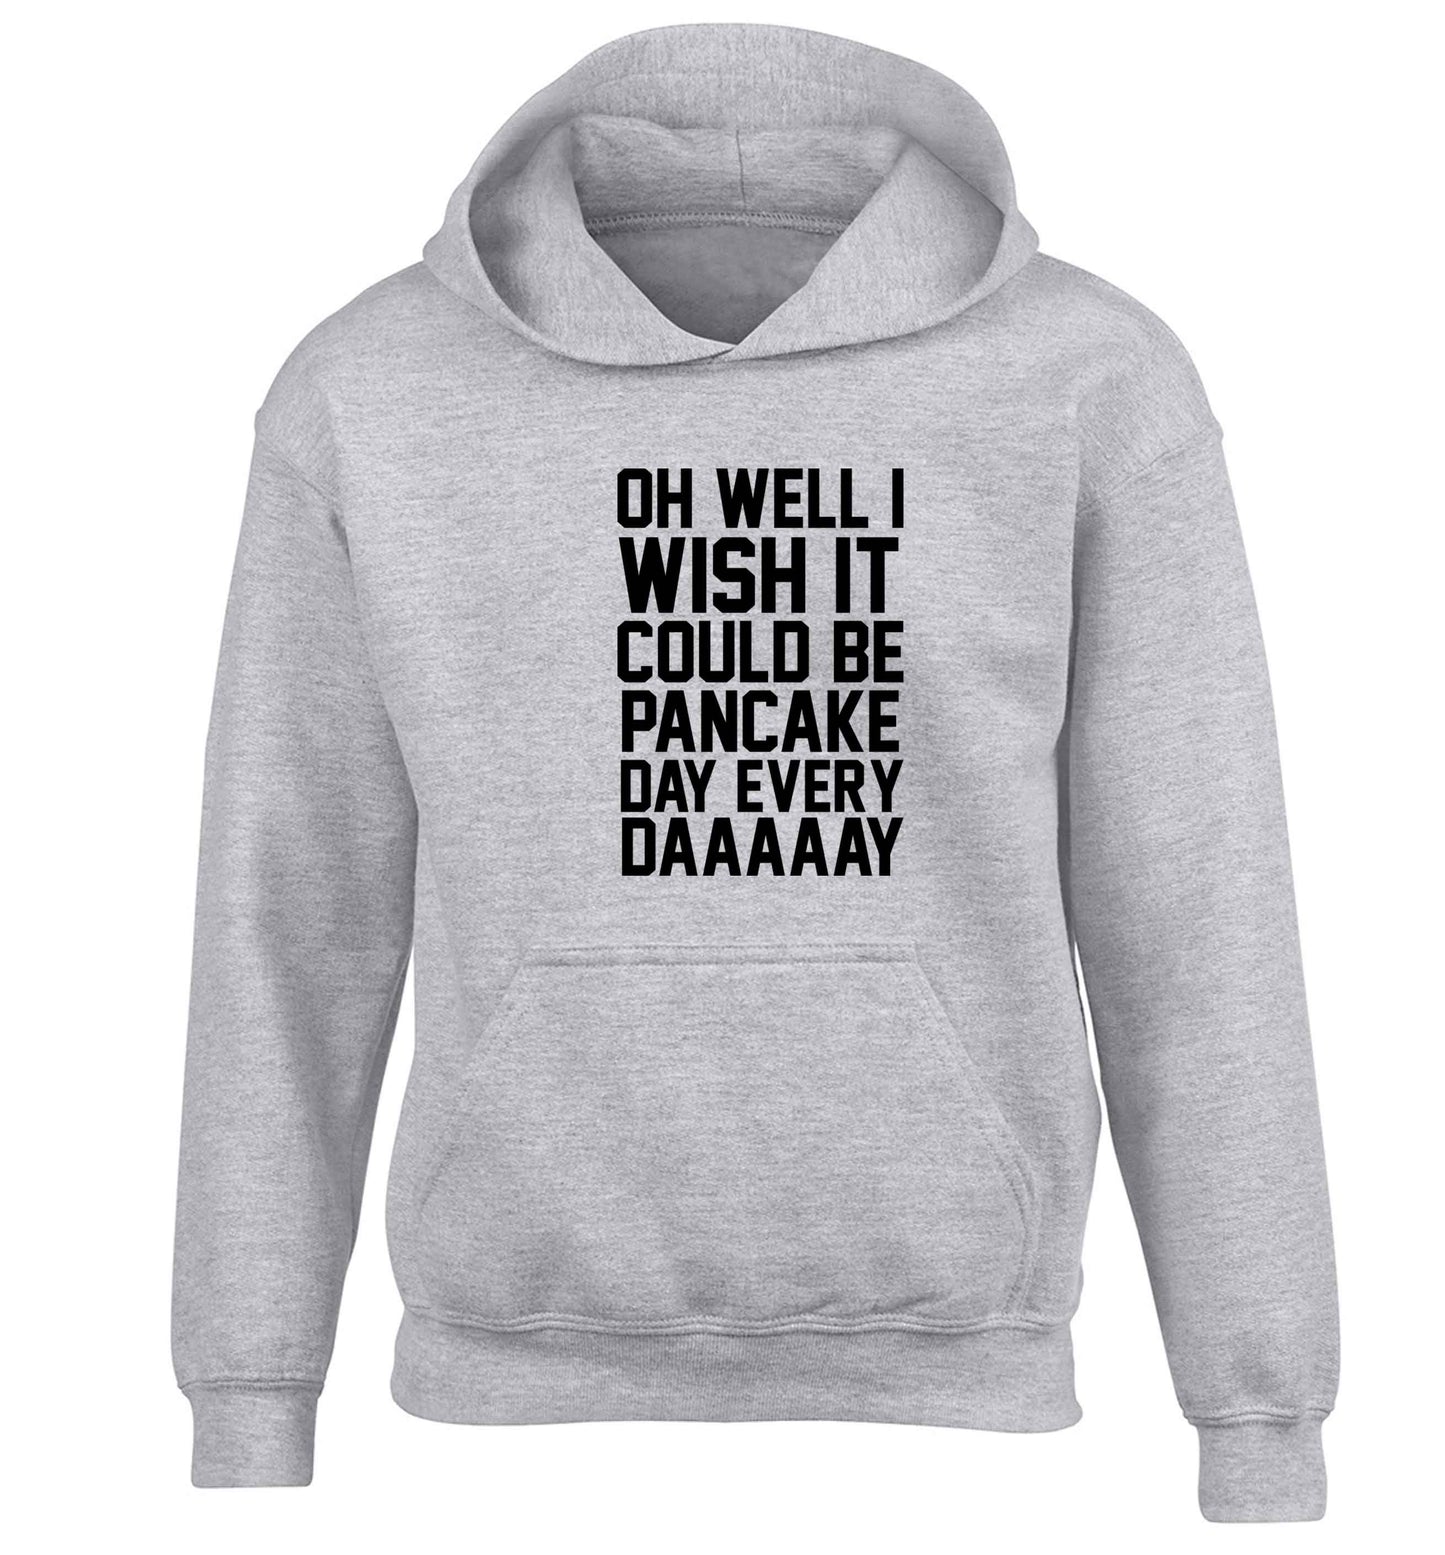 Oh well I wish it could be pancake day every day children's grey hoodie 12-13 Years